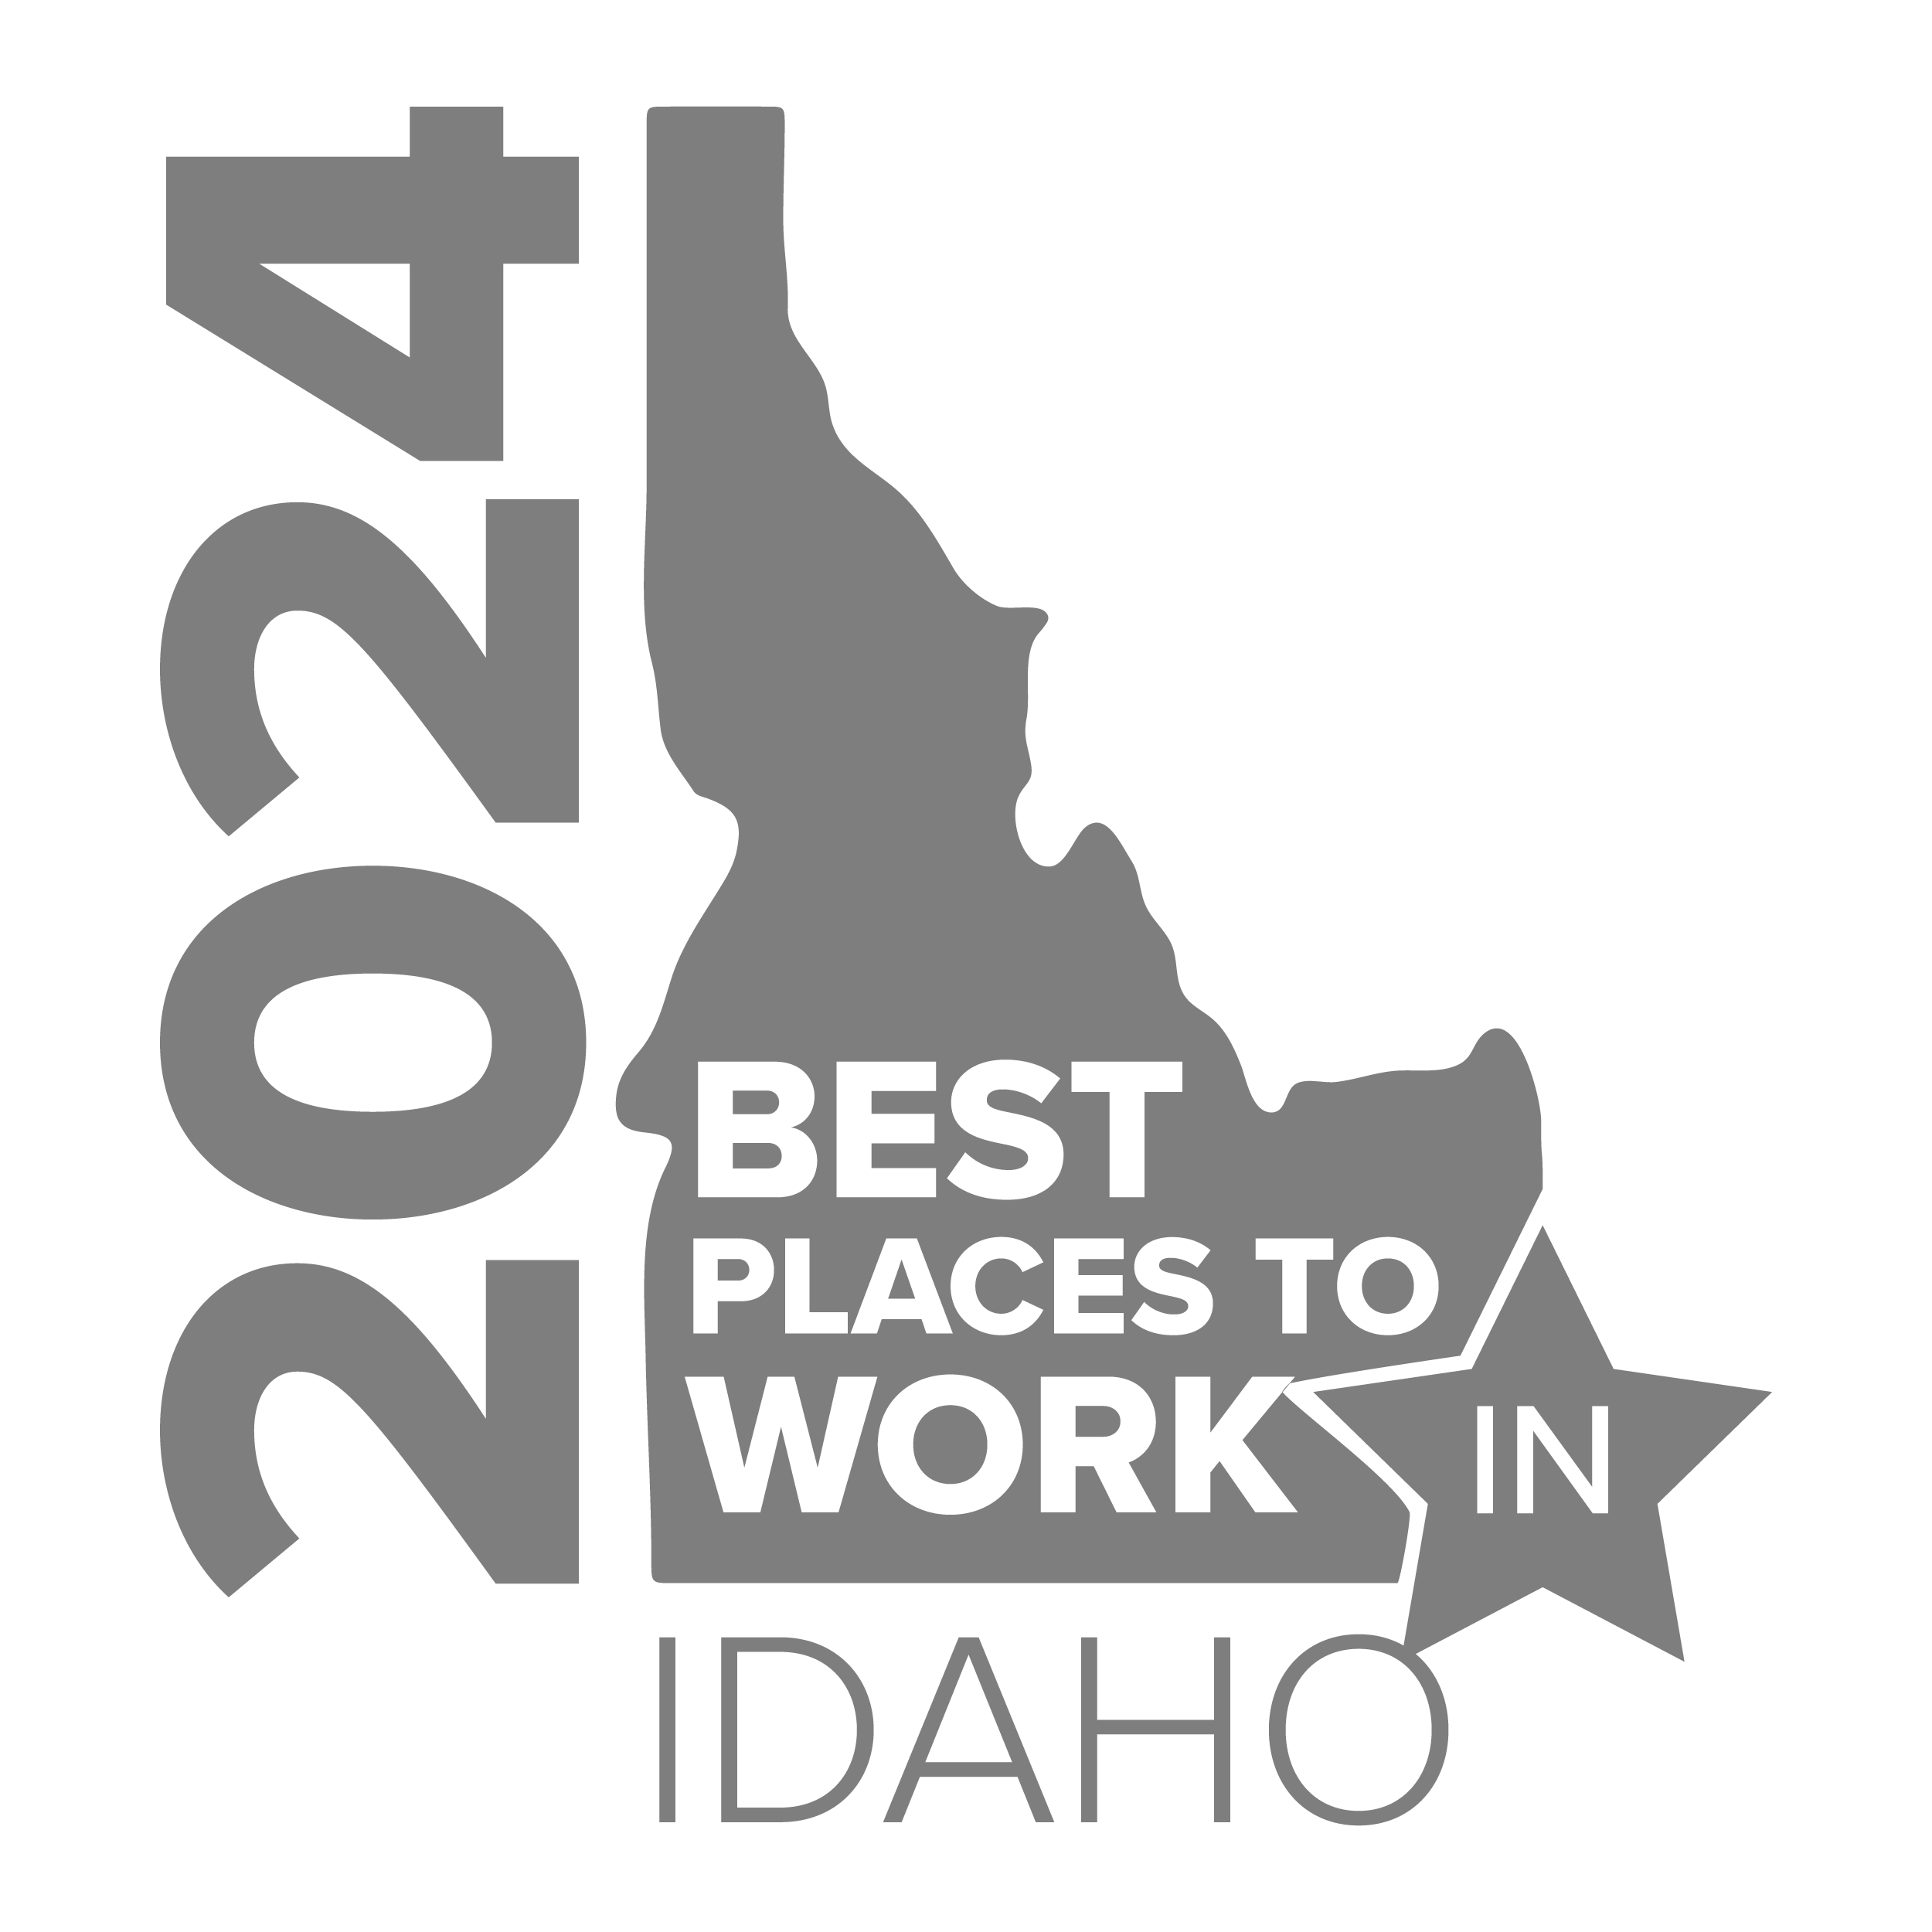 Best Places to Work in Idaho logo